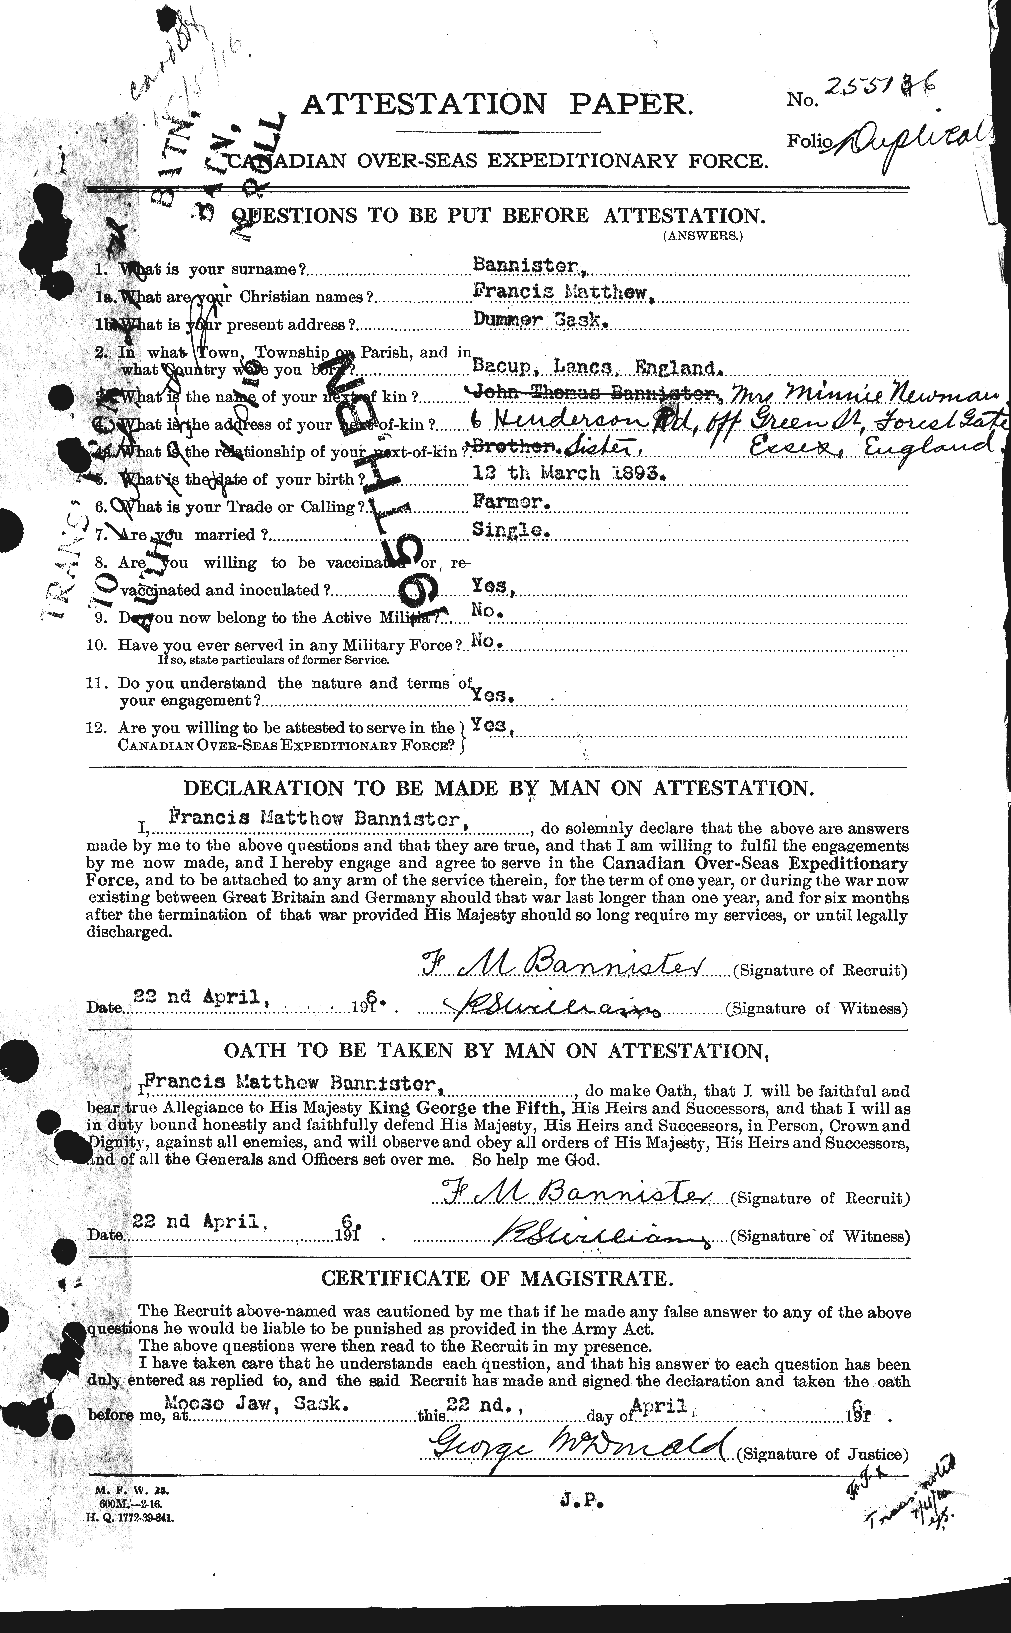 Personnel Records of the First World War - CEF 224804a